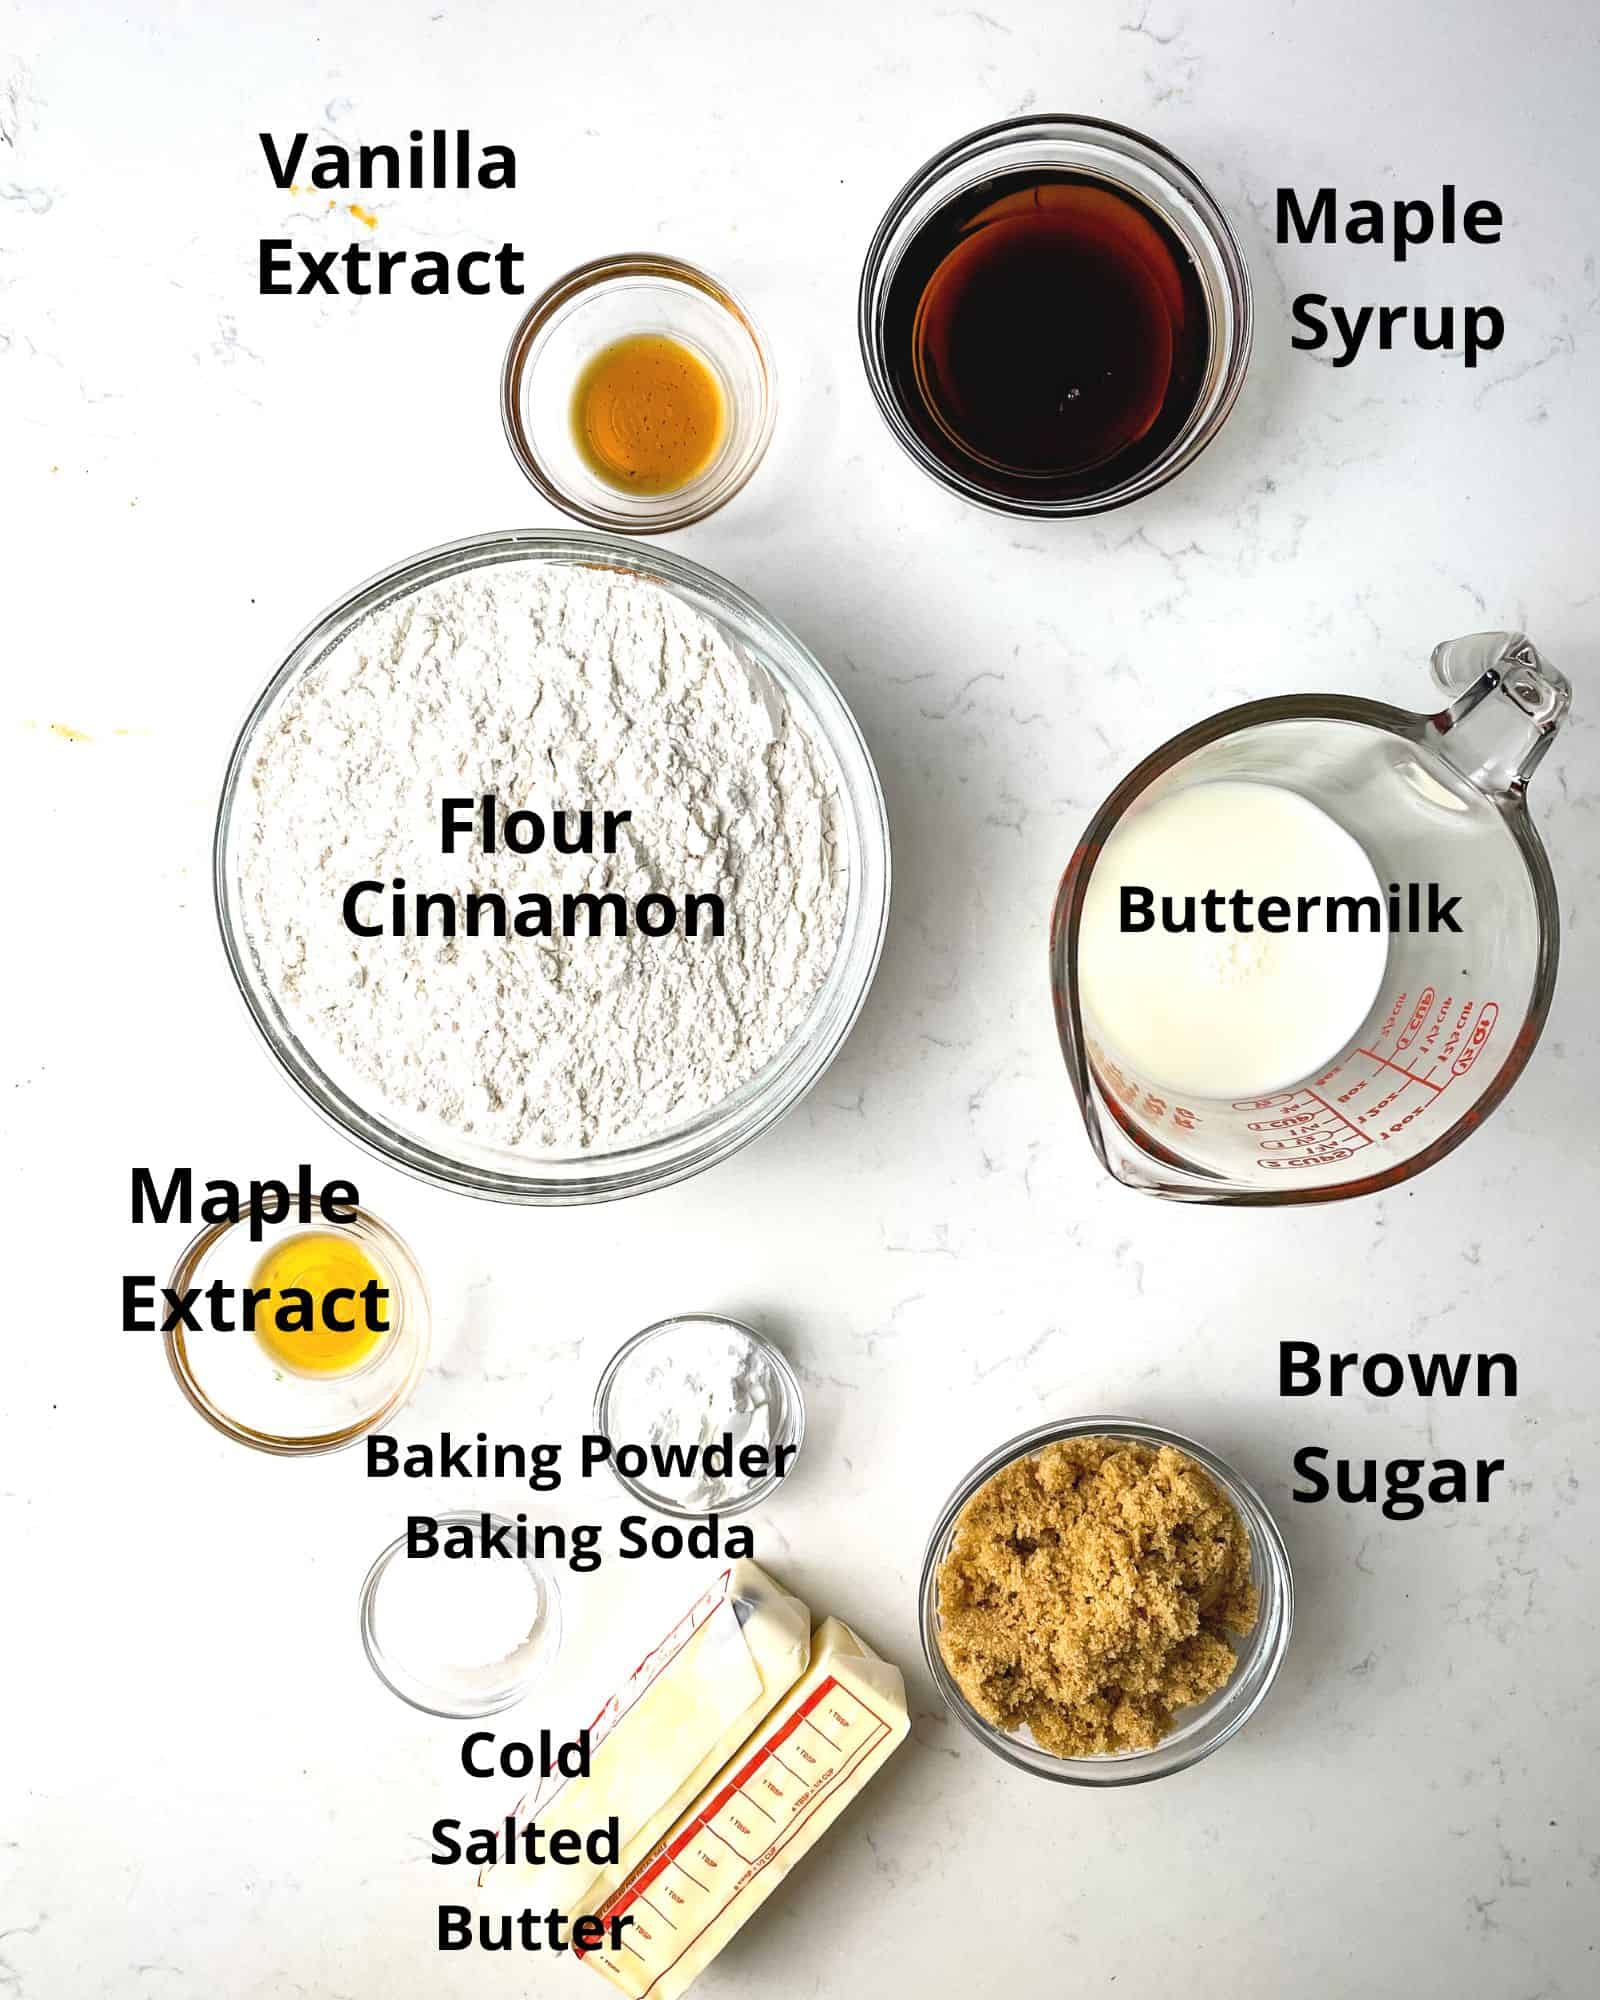 ingredients to make maple biscuits - flour, brown sugar, buttermilk, maple syrup, vanilla extract, maple extract, salted butter, baking powder, baking soda, and salt.